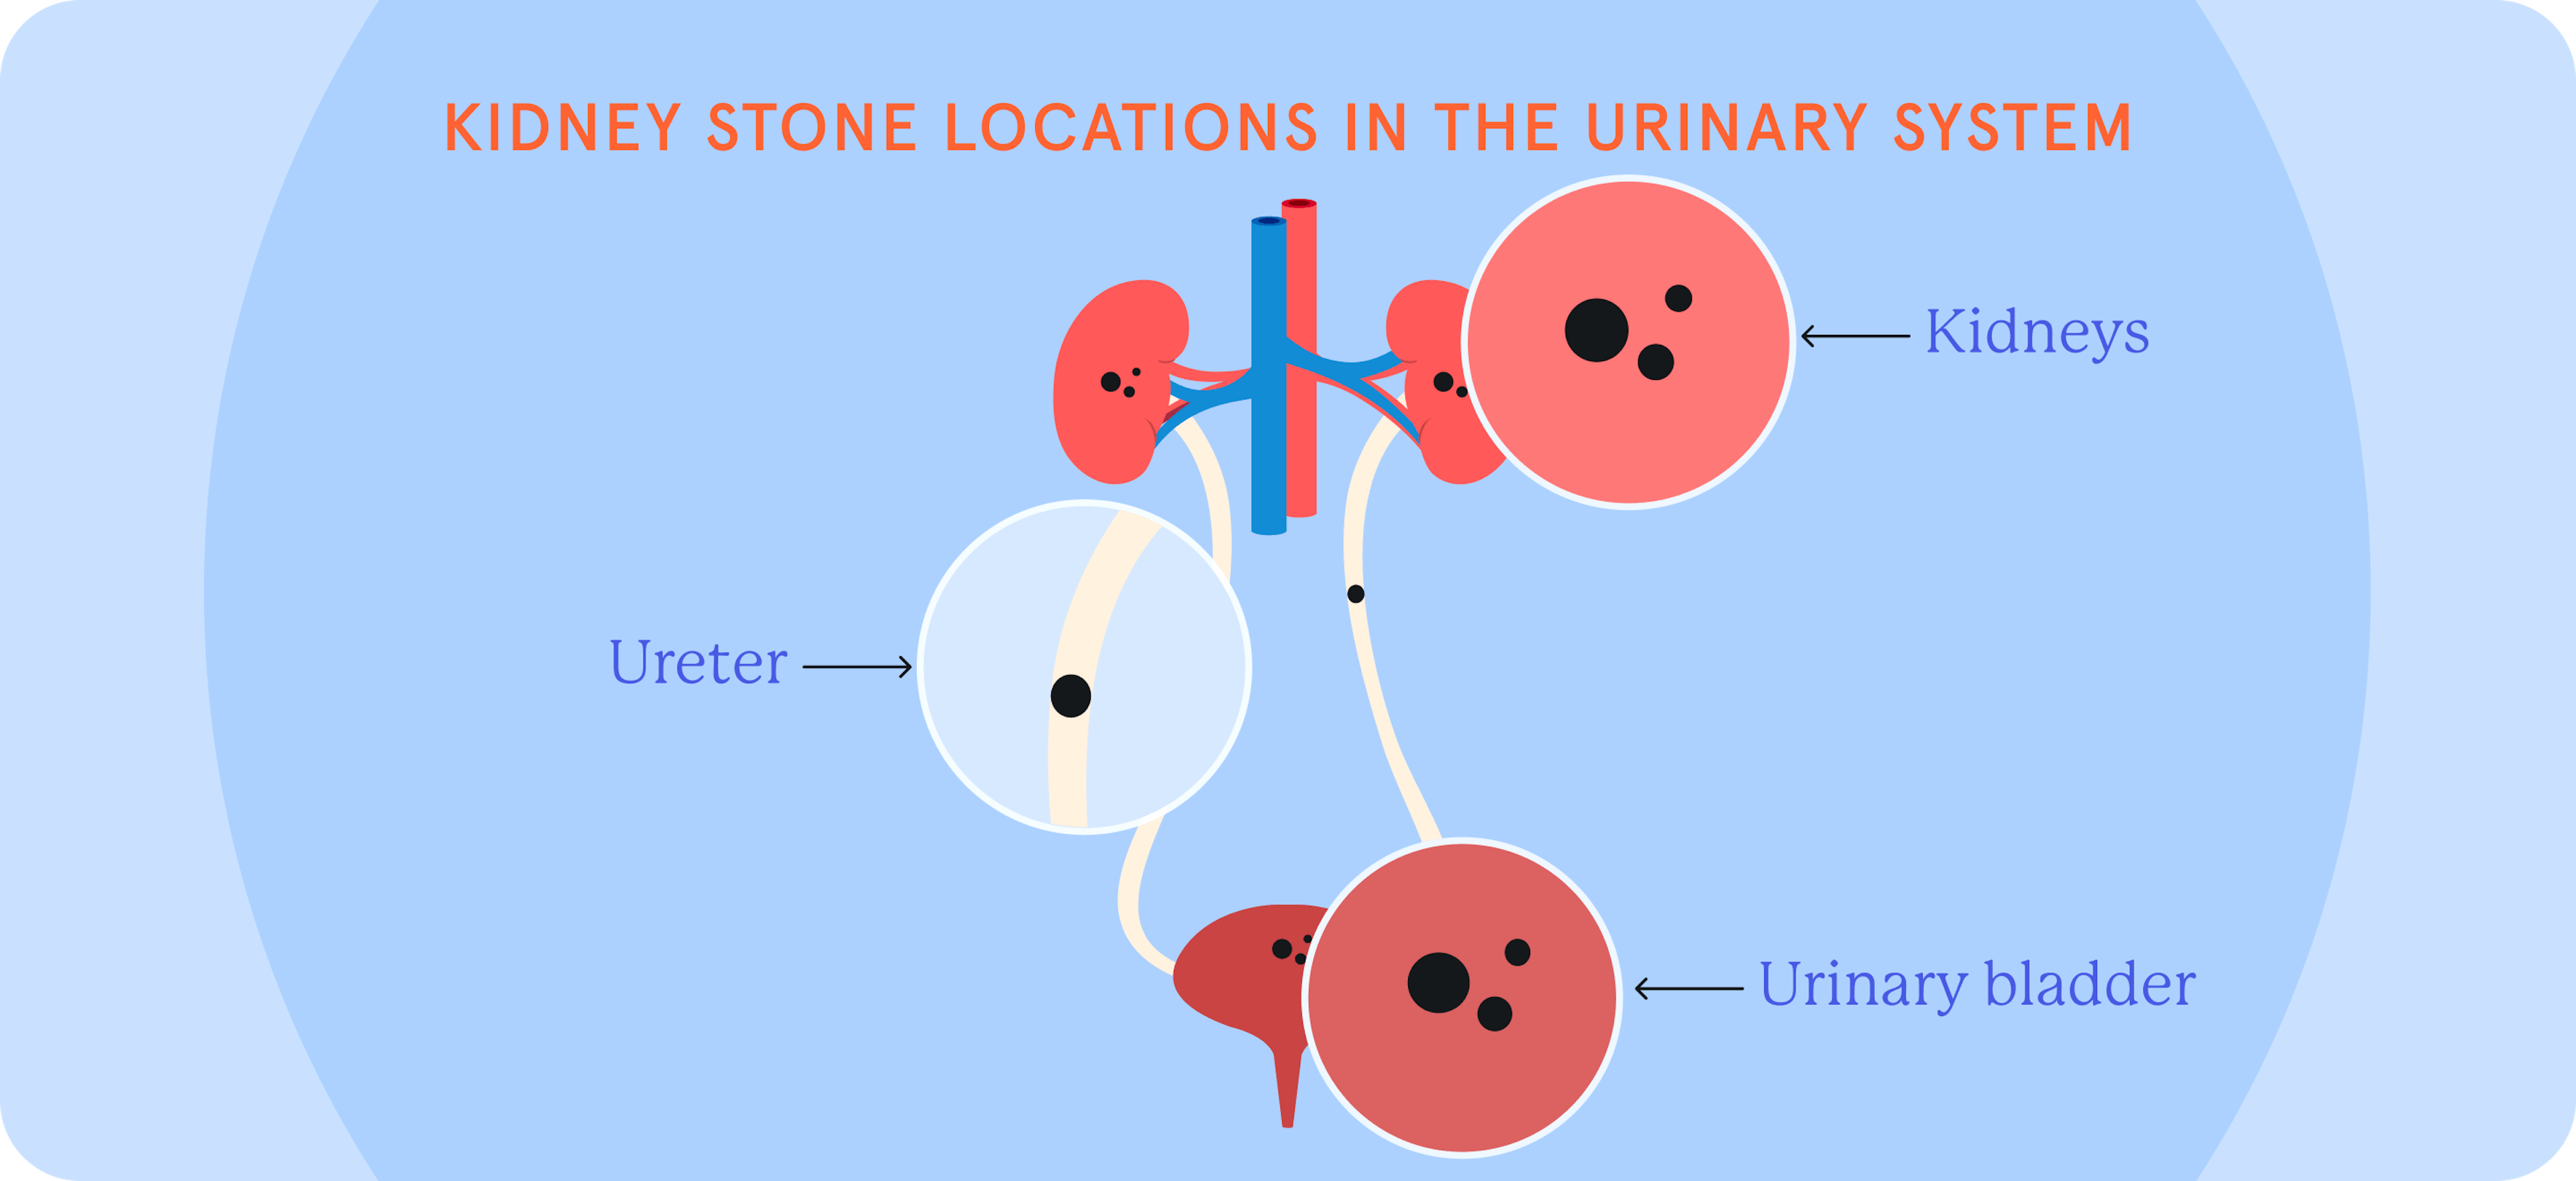 An infographic showing kidney stone locations in the urinary system